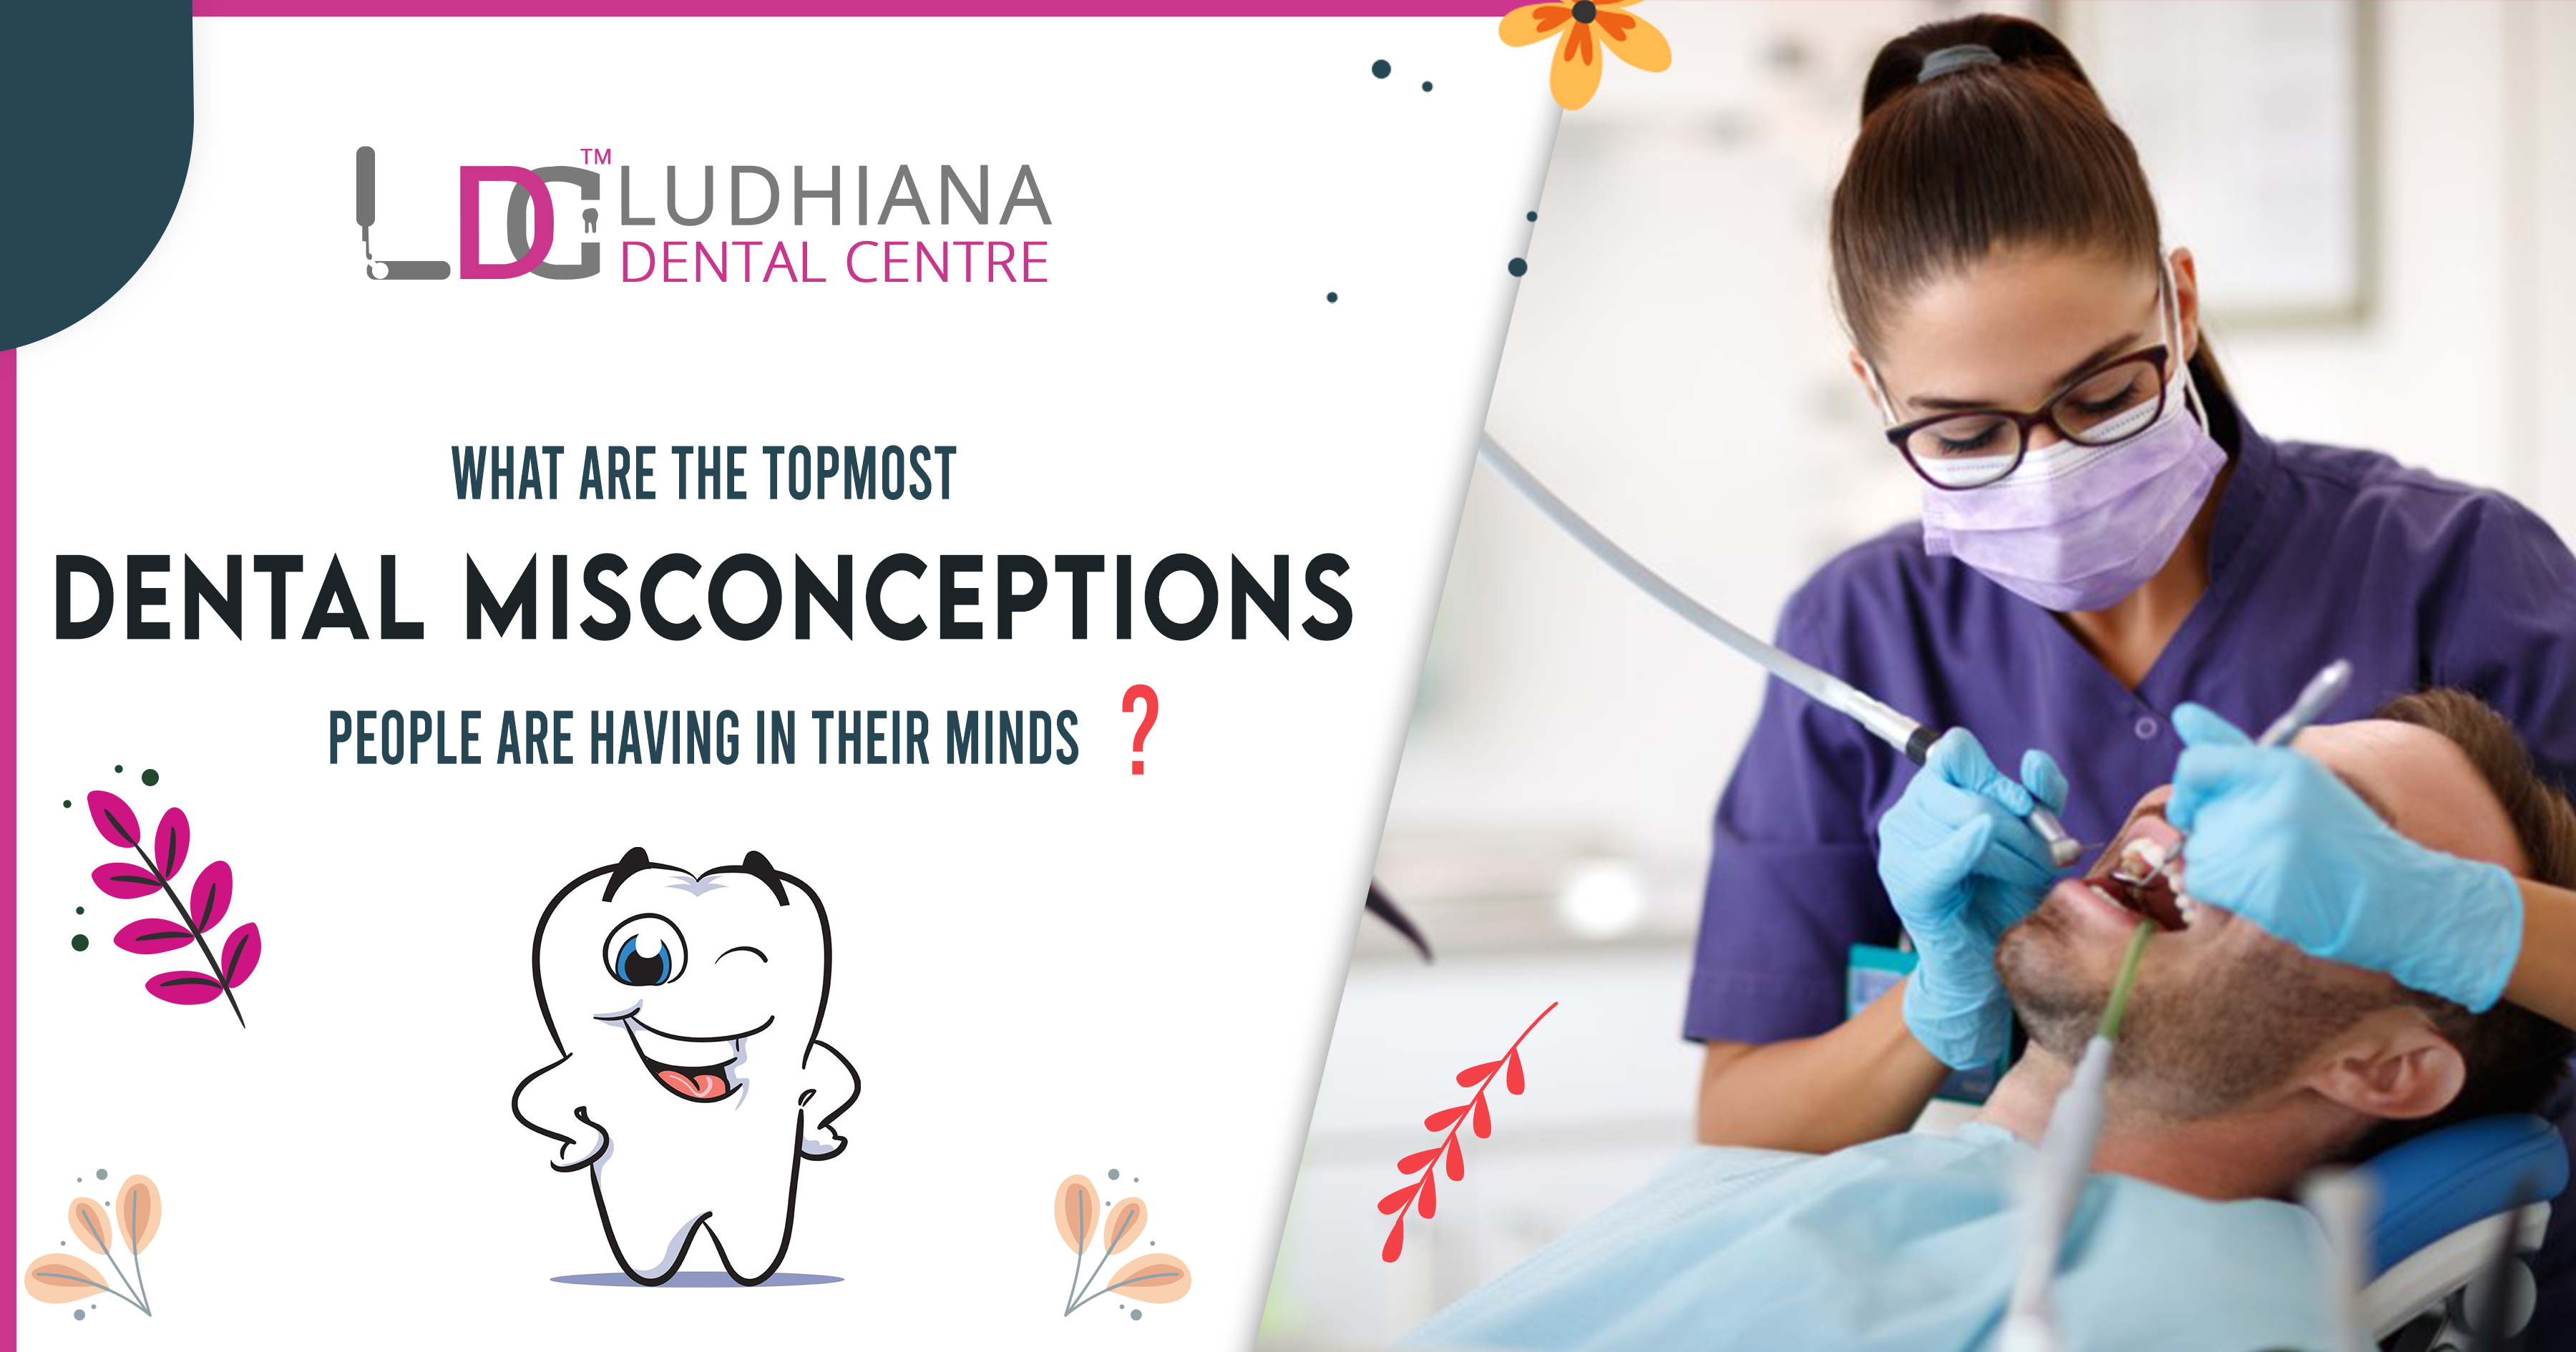 What are the topmost dental misconceptions people are having in their minds?